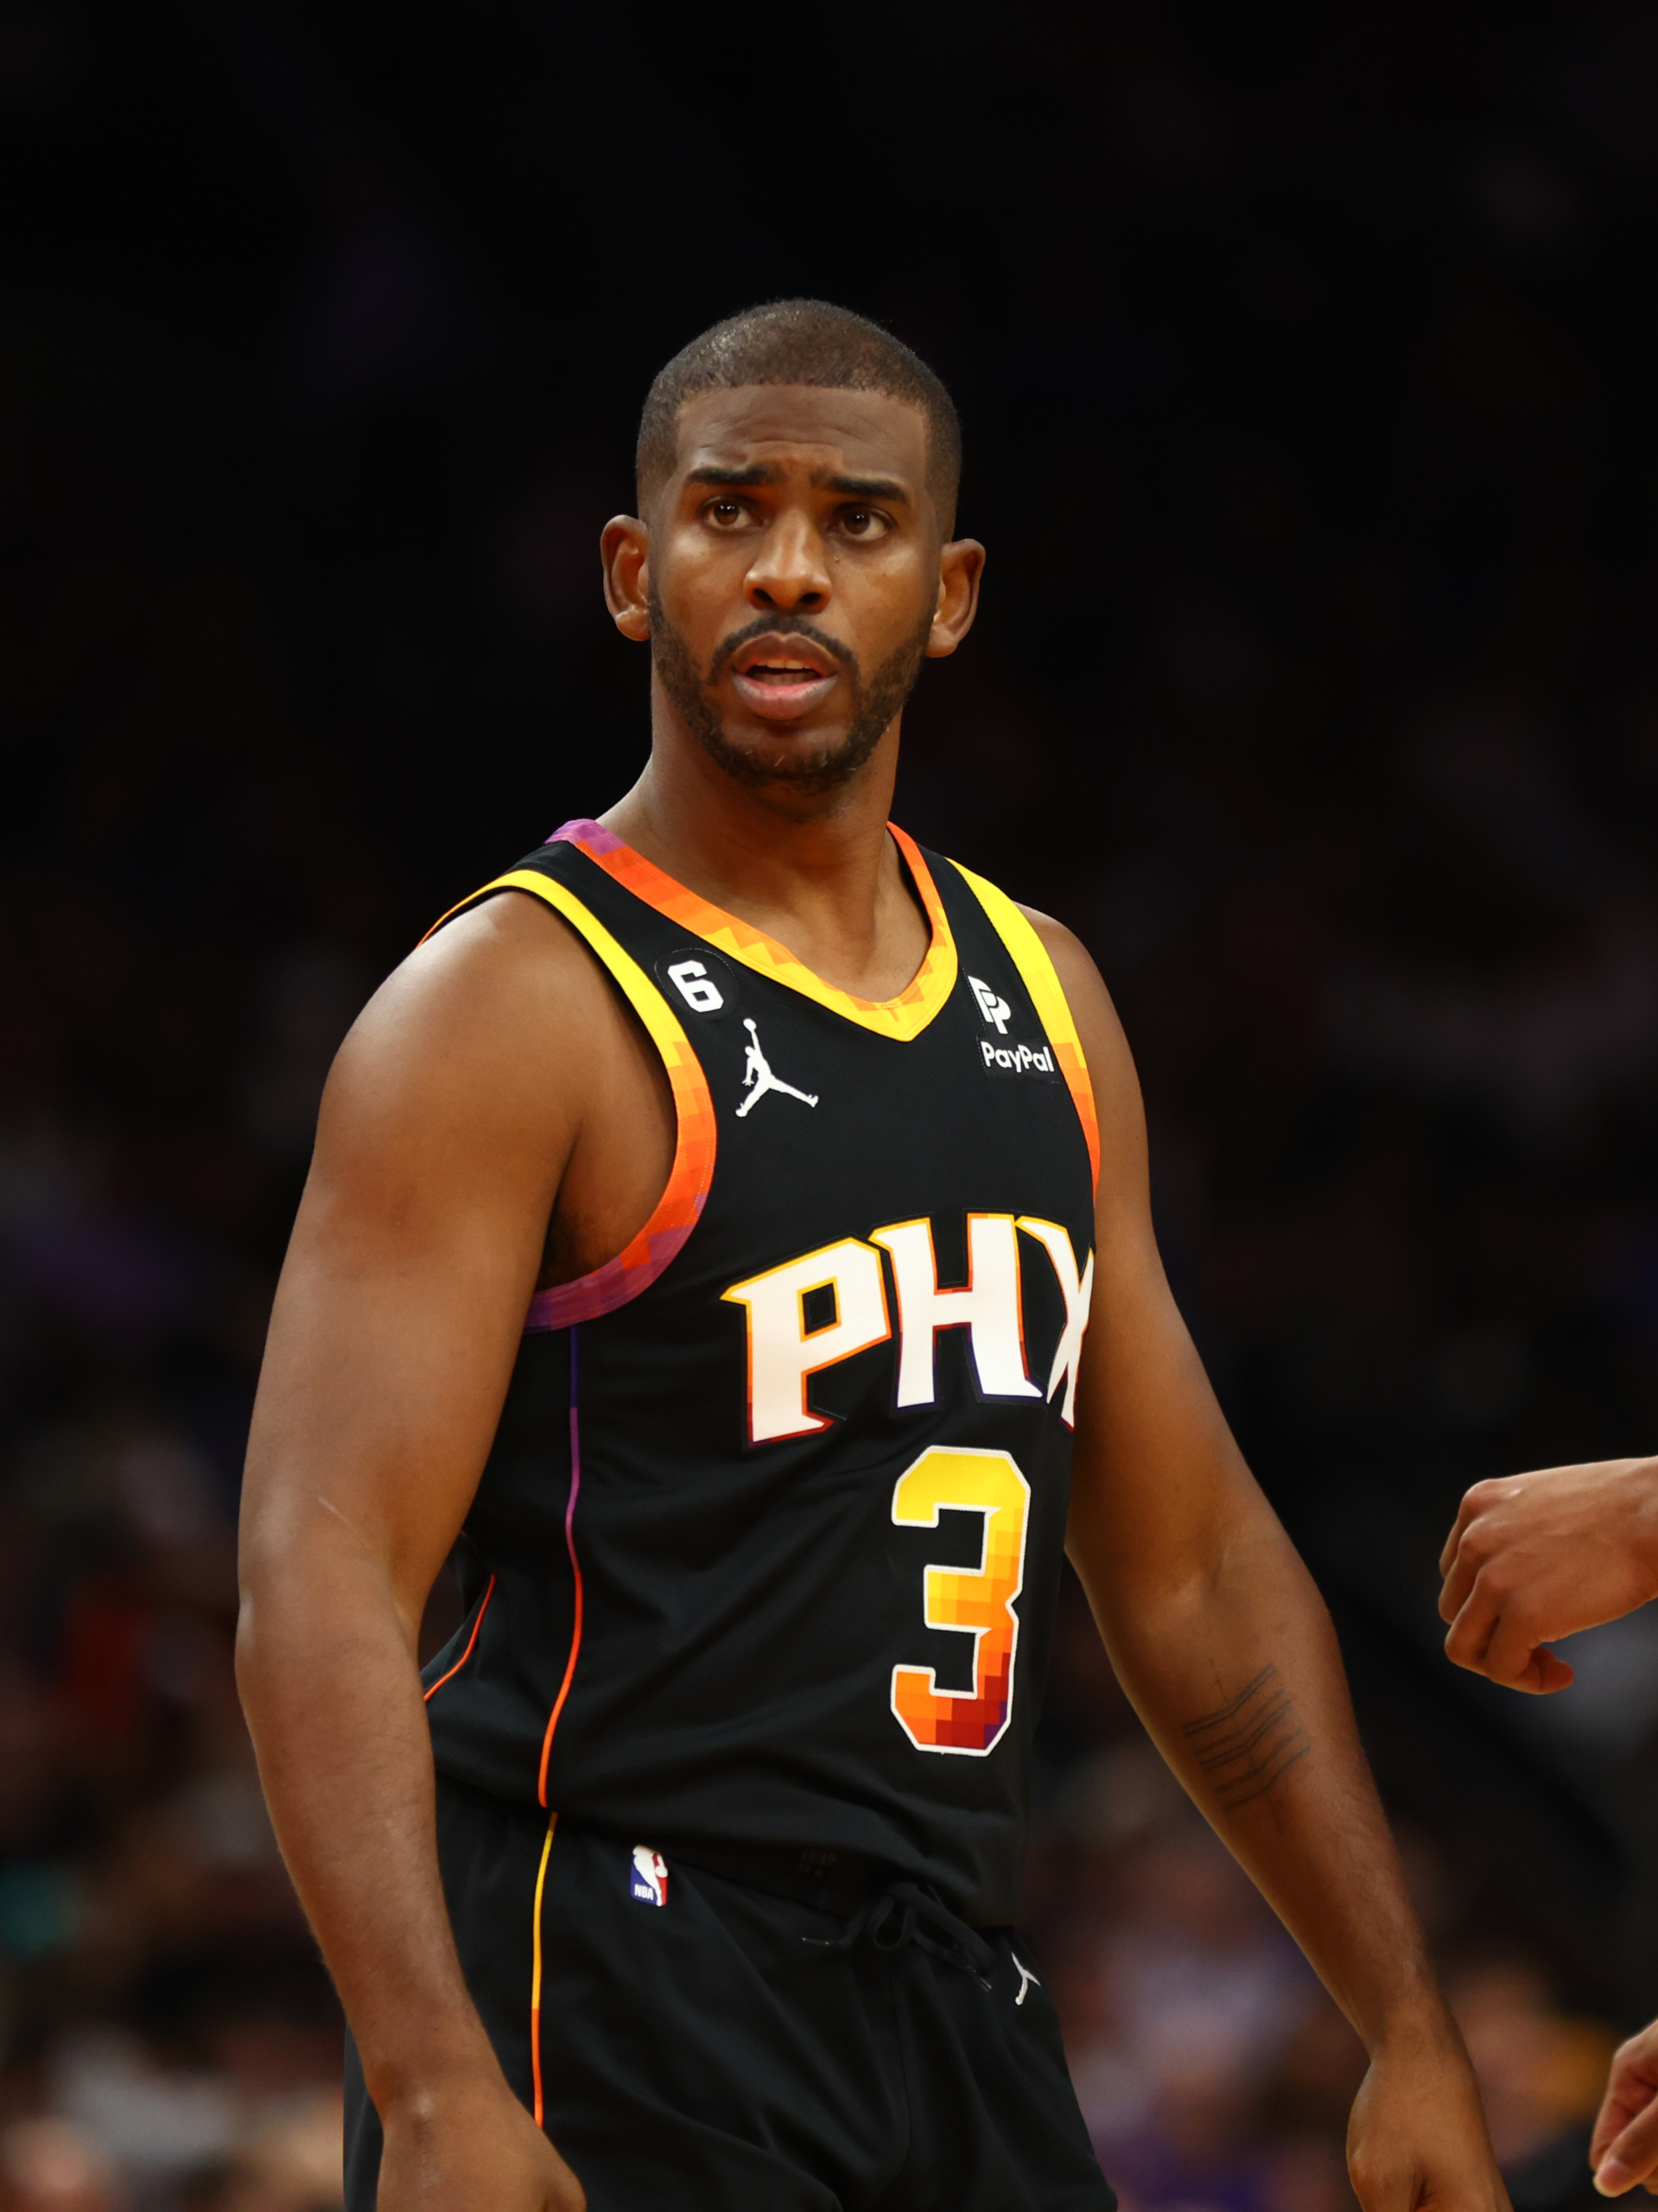 4 Big takeaways from the Phoenix Suns’ first 4 games, including Chris Paul’s slow start